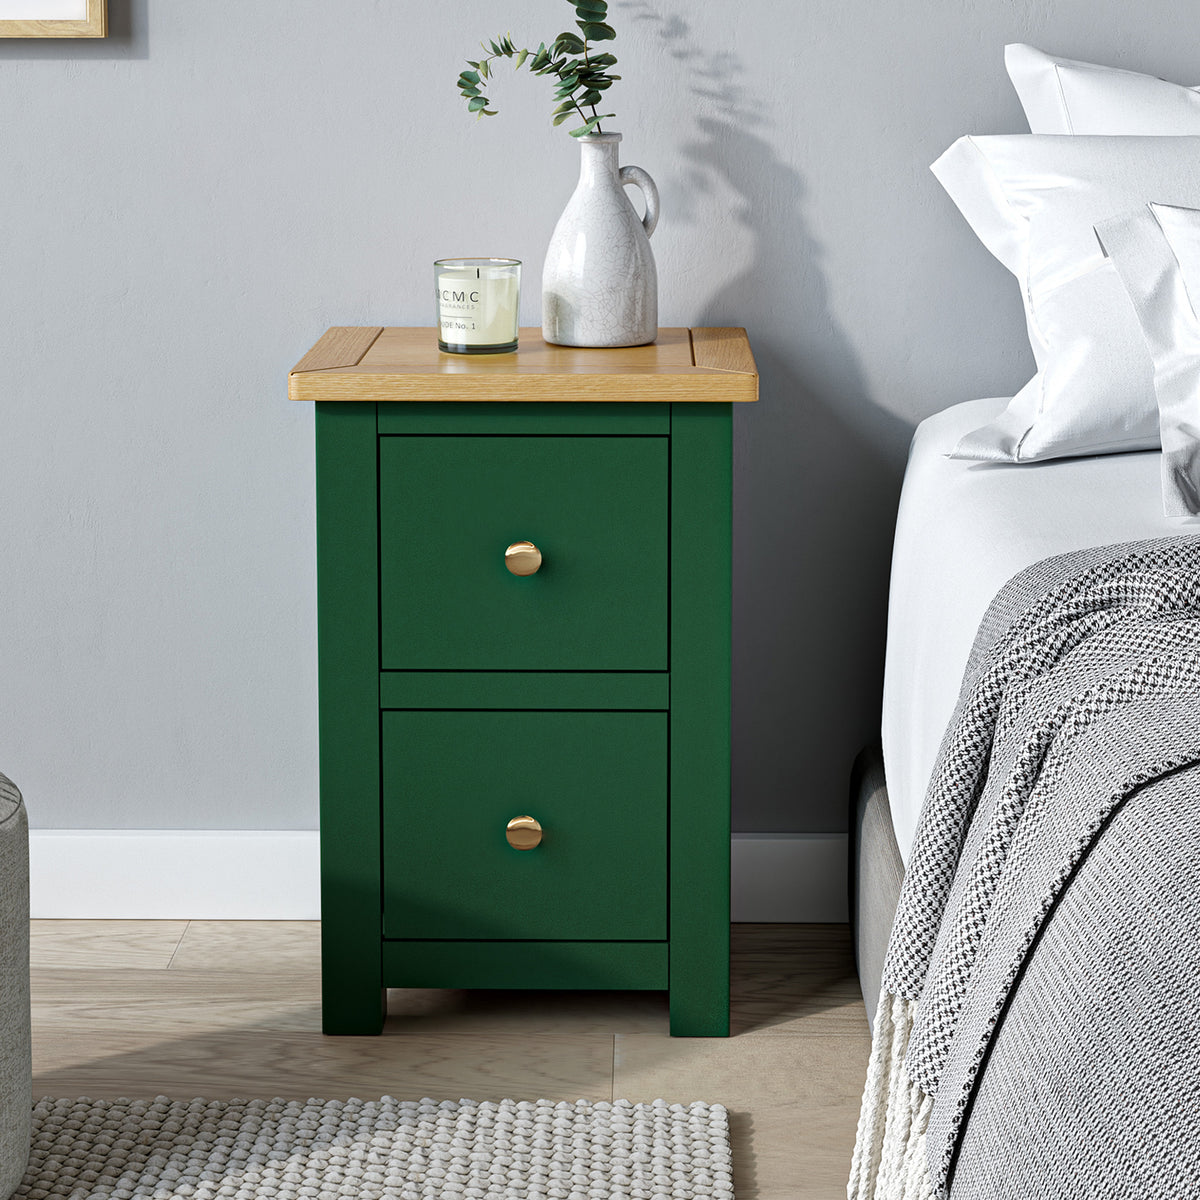 Duchy Puck Green 2 Drawer Bedside Table with Oak Top for bedroom